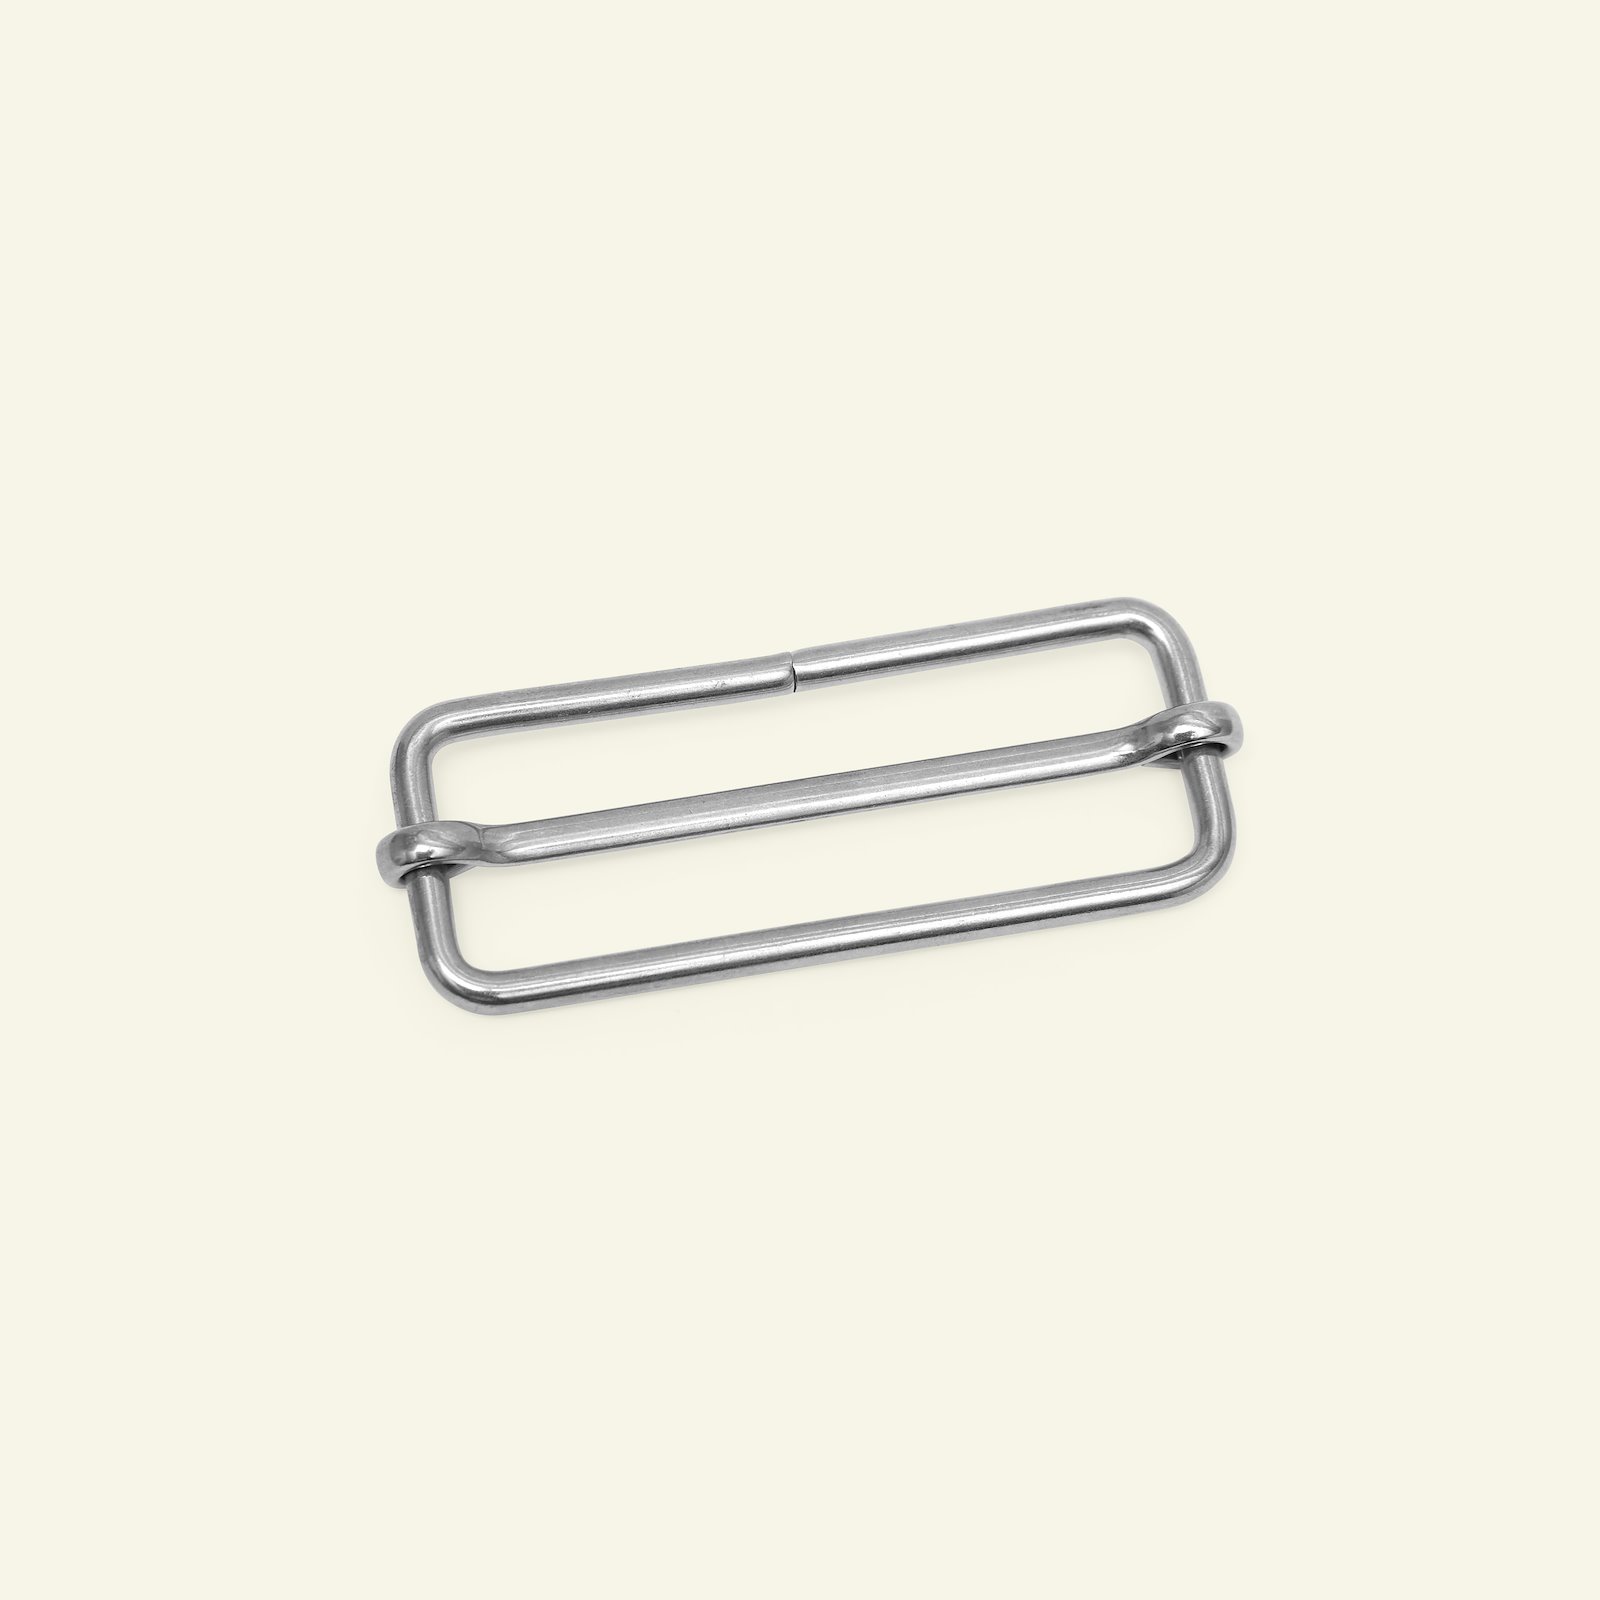 Buckle adjust 67x22mm silver col 1pcs 45114_pack